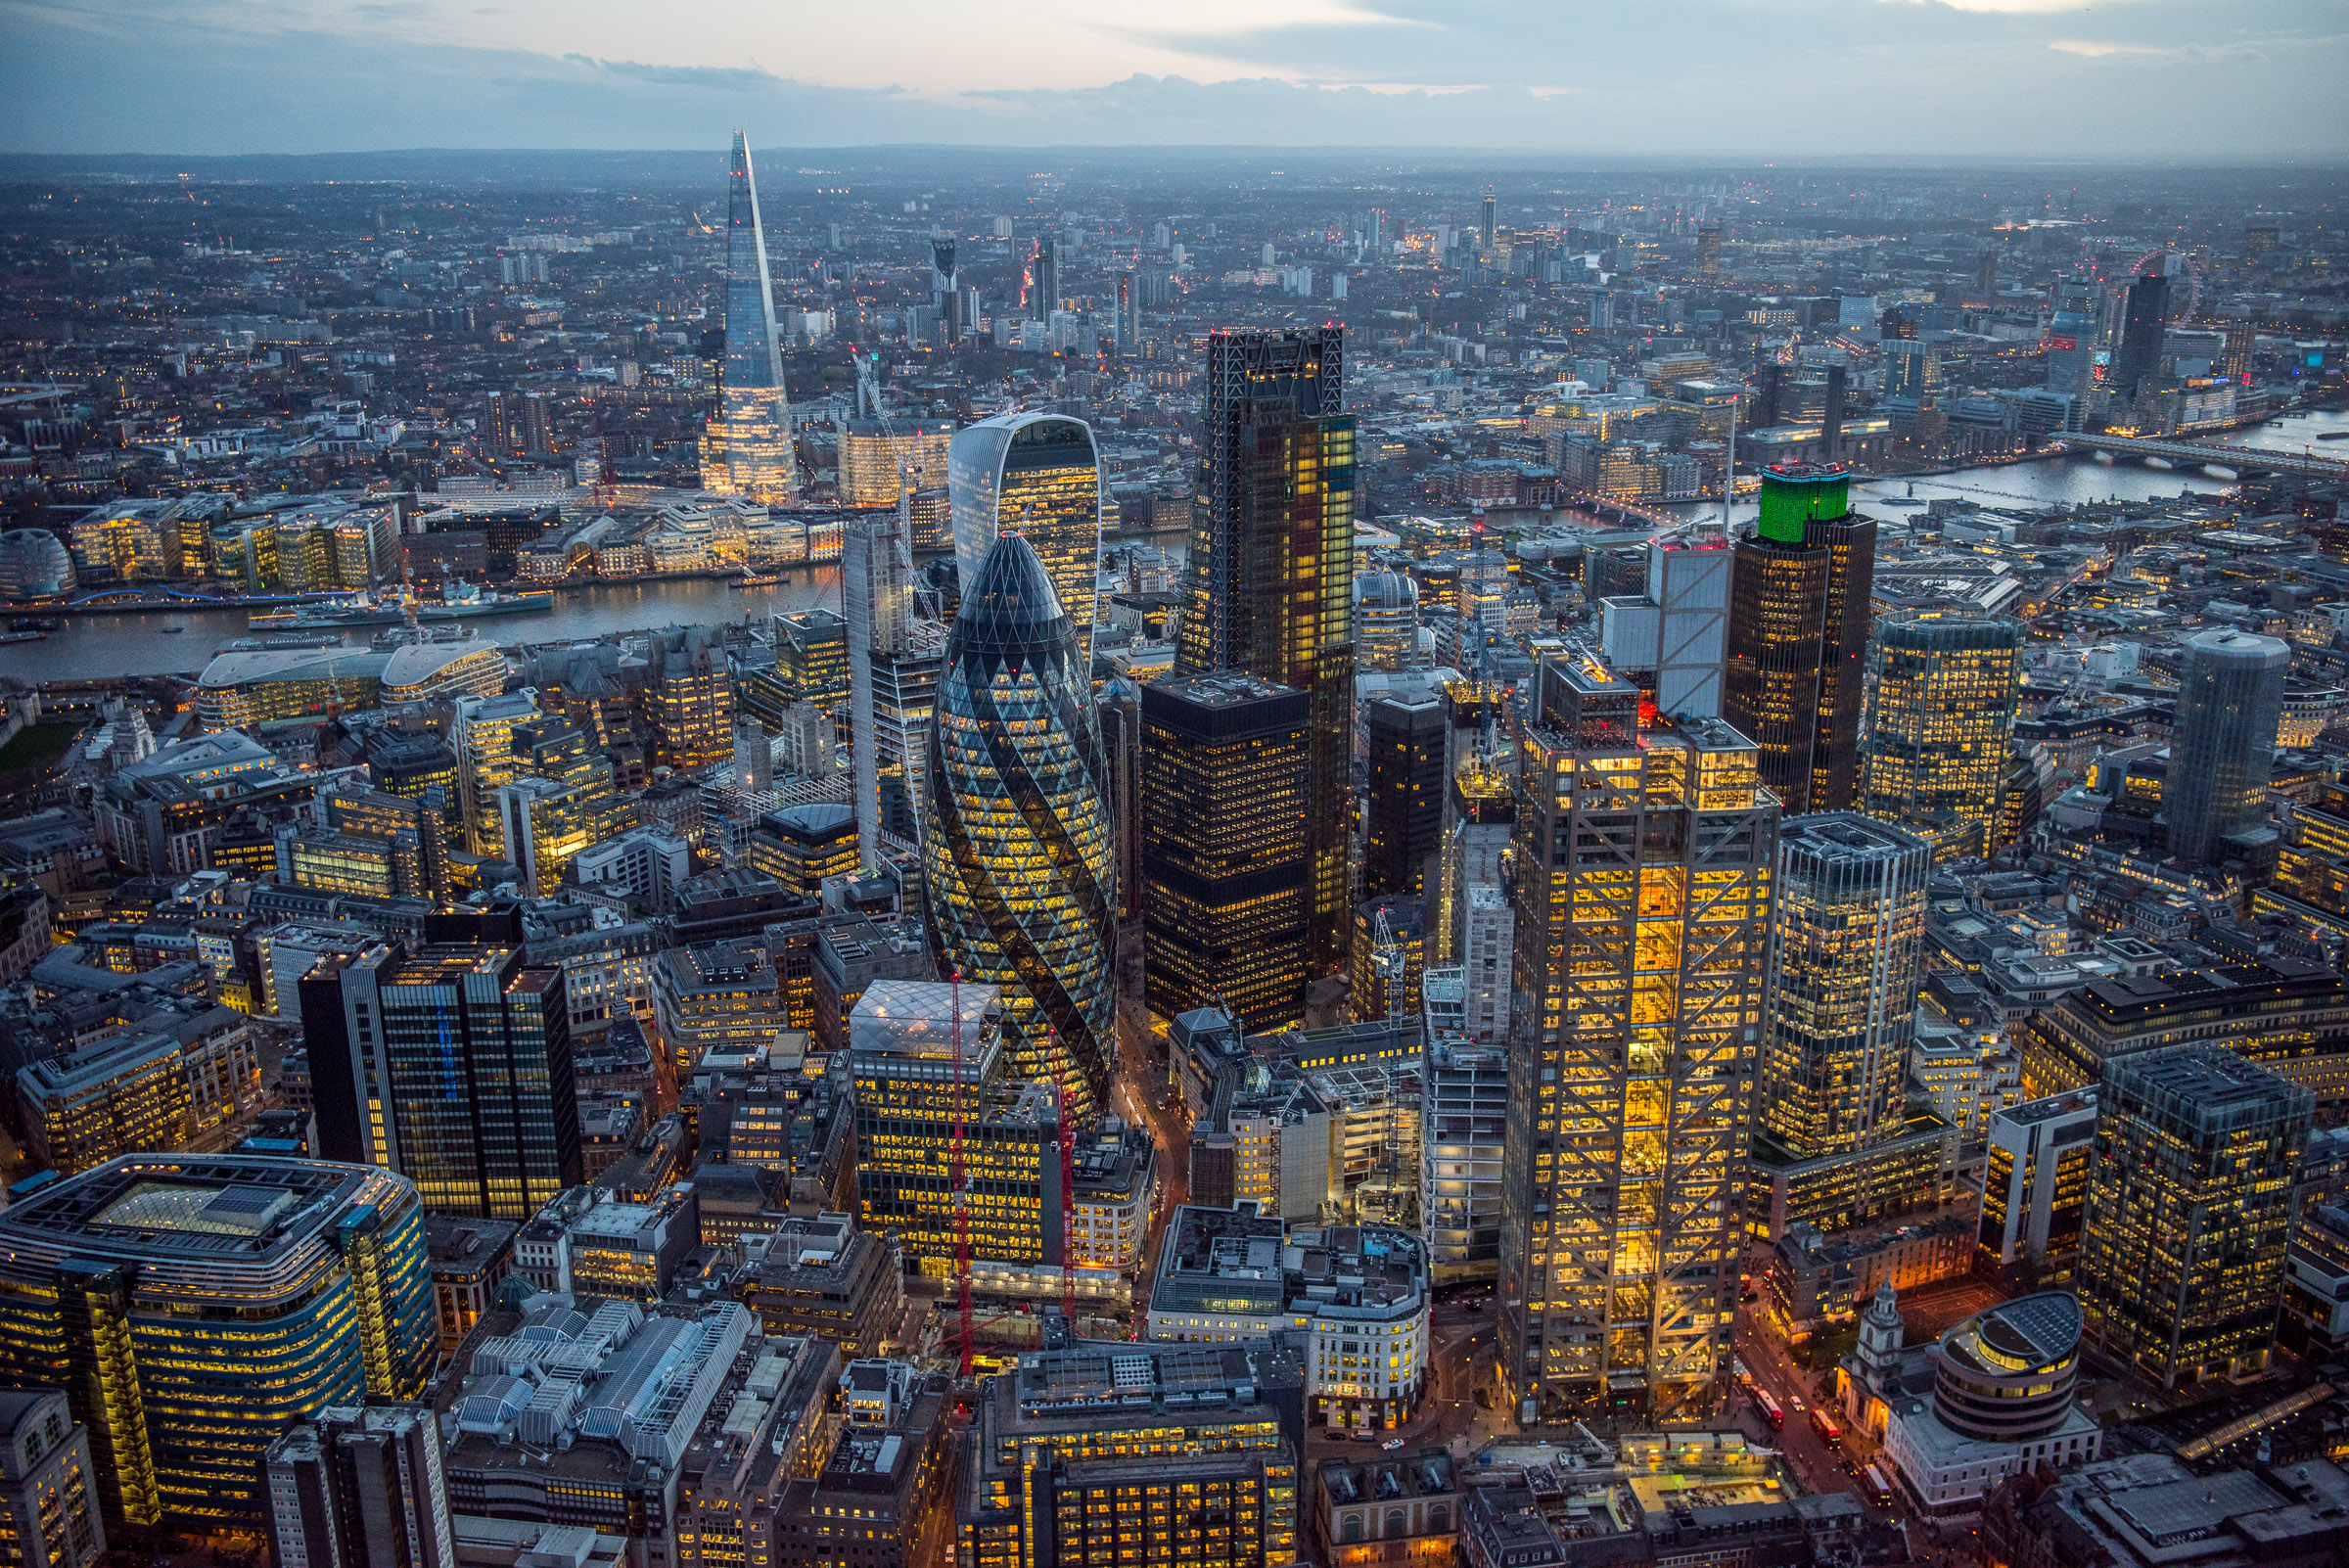 Dusk aerial view across the Square Mile / City of London . Three huge new skyscrapers, 22 Bishopsgate, The Scalpel and 100 Bishopsgate are currently under construction in the City and will again change the skyline of London enormously.